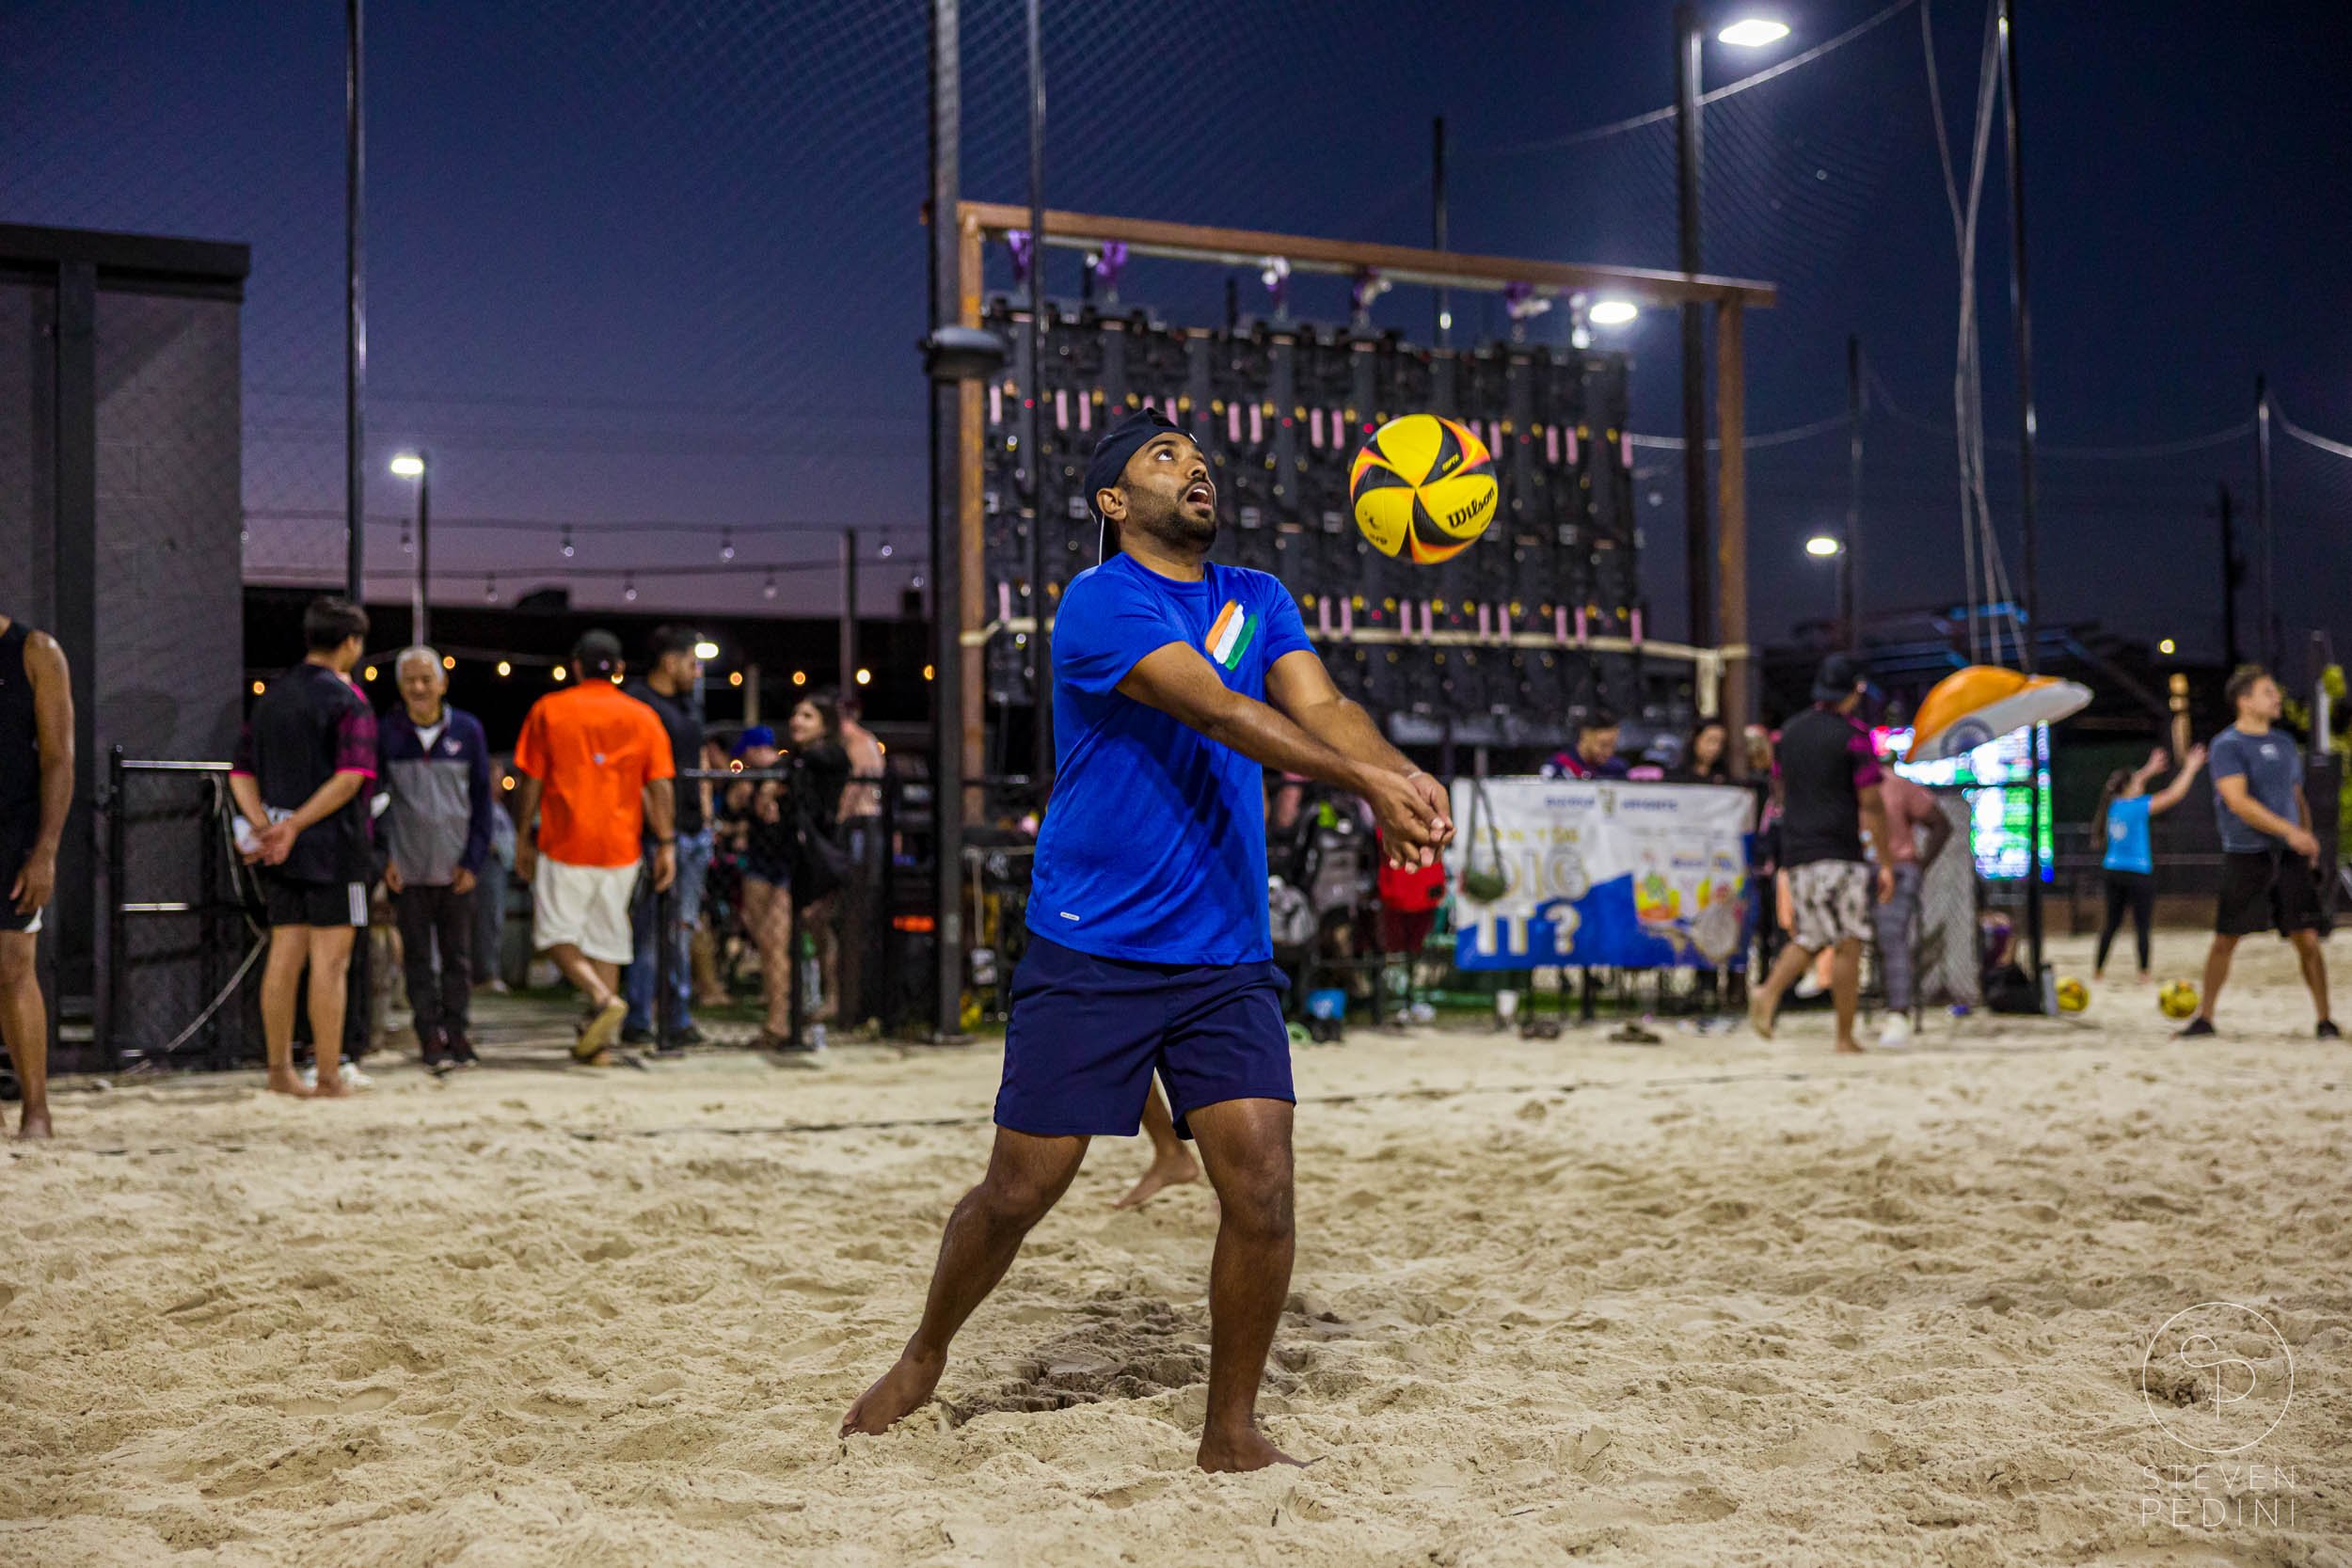 Steven Pedini Photography - Bumpy Pickle - Sand Volleyball - Houston TX - World Cup of Volleyball - 00327.jpg